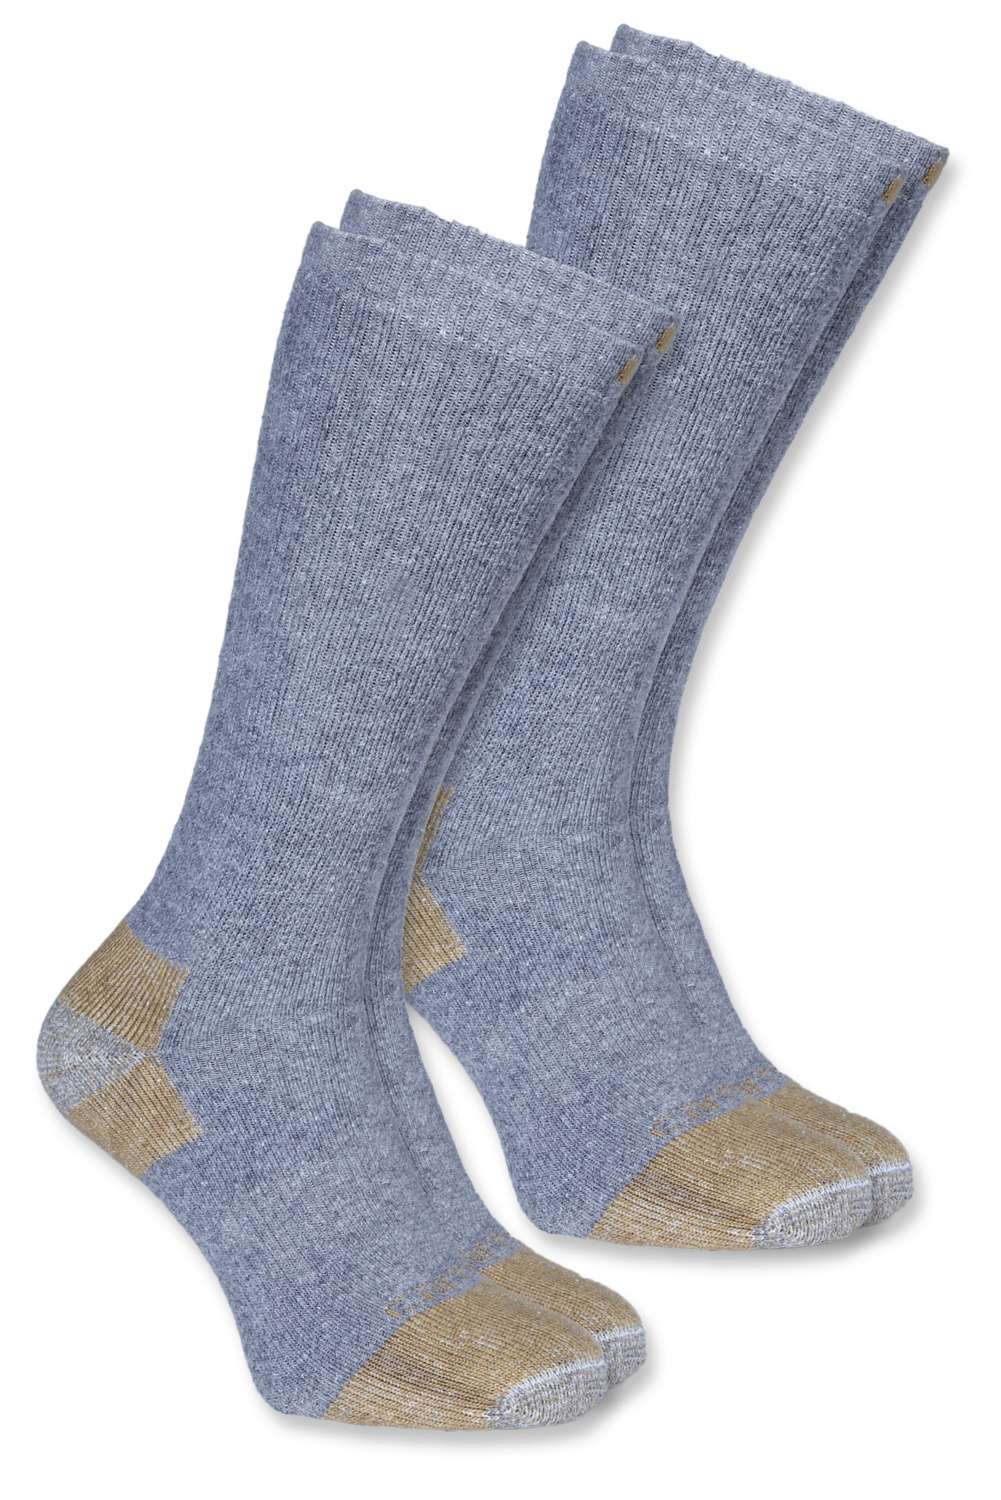 Chaussettes CARHARTT All-Season 2 paires